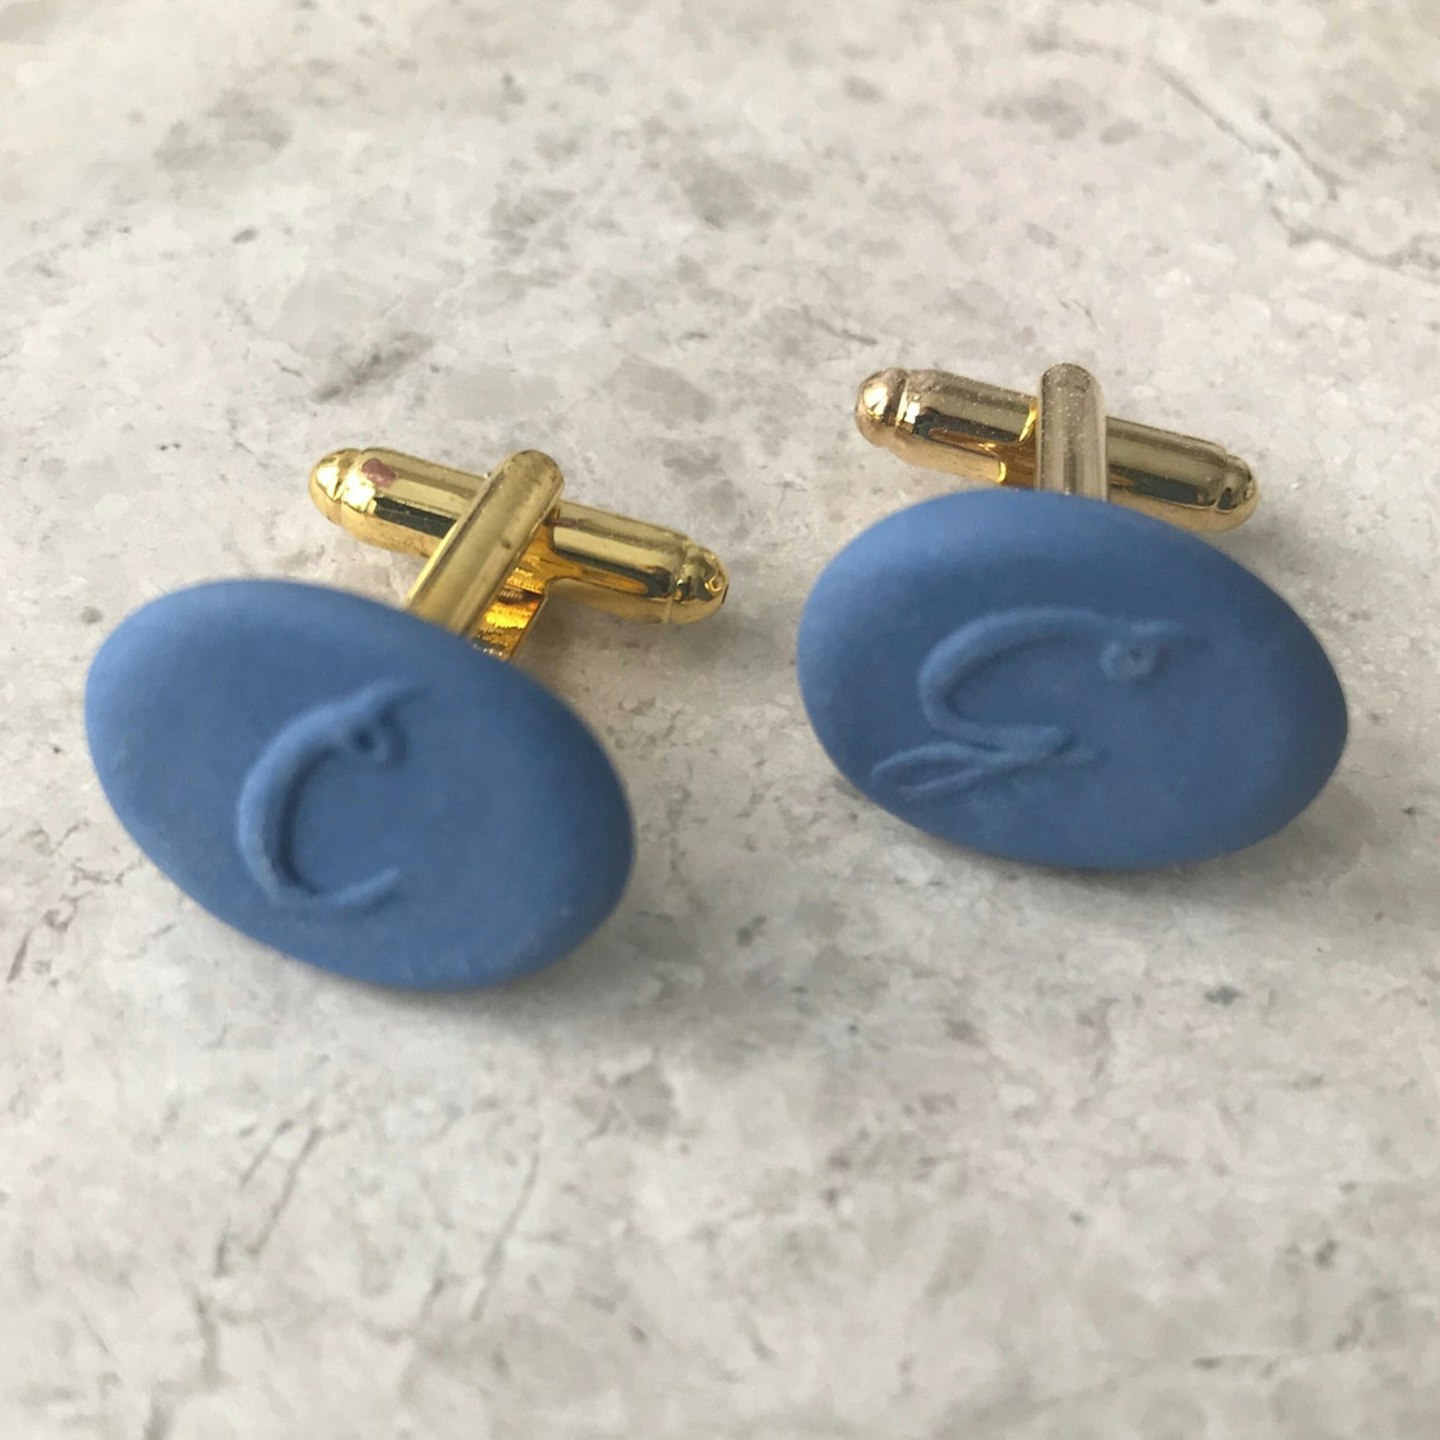 Etsy, Personalized Engraved Cufflinks, £74